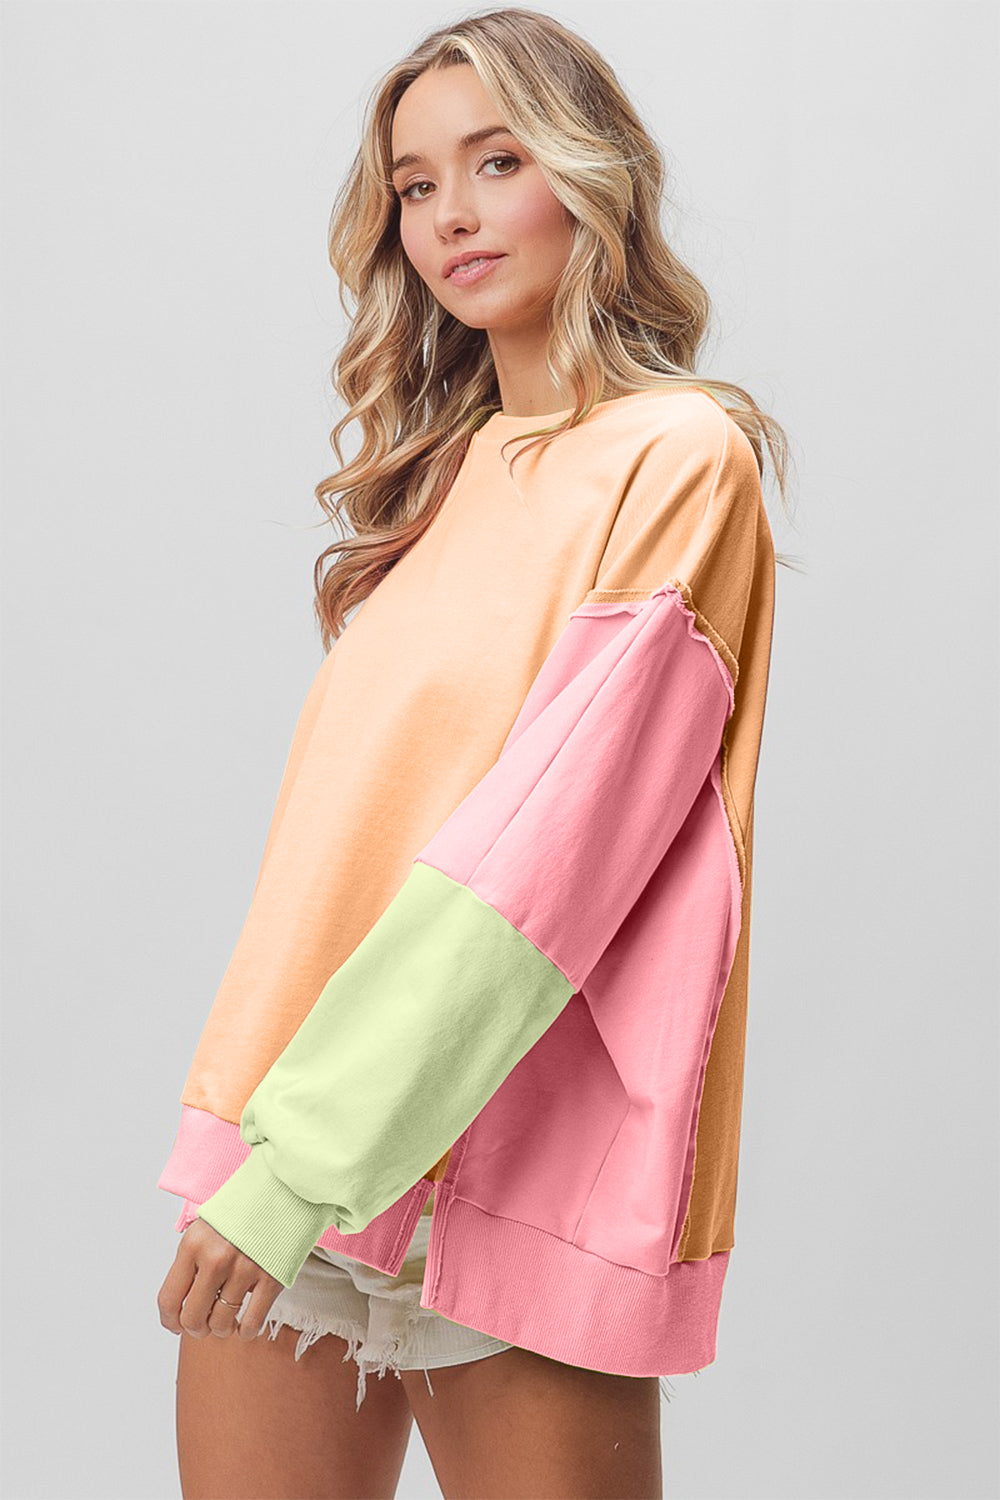 washed colorblock sweatshirt in summer pastel colors